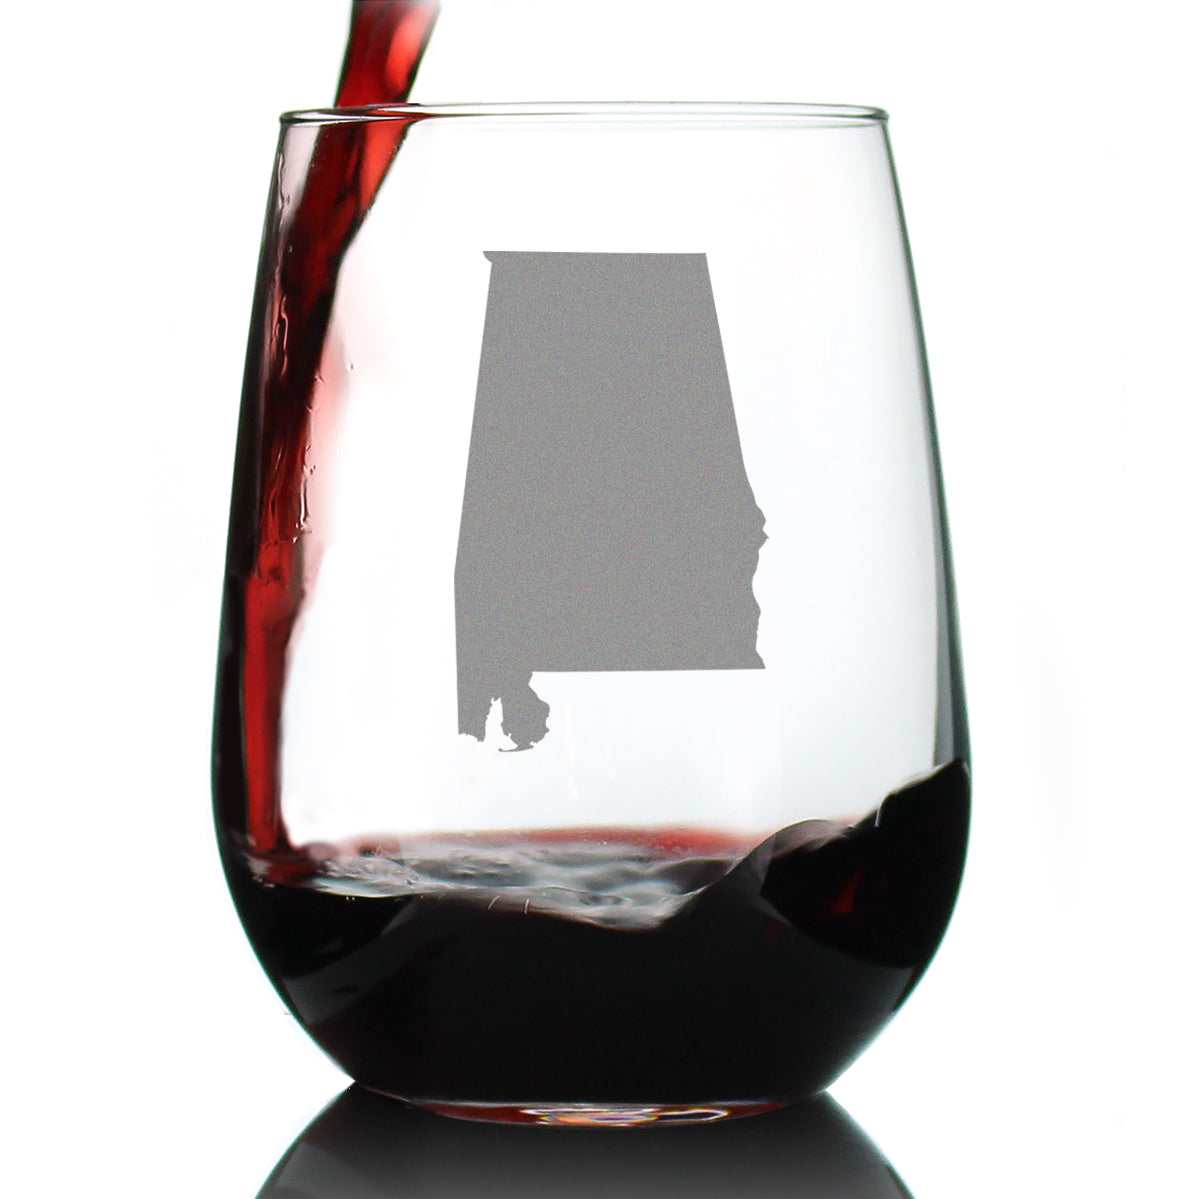 Alabama State Outline Stemless Wine Glass - State Themed Drinking Decor and Gifts for Alabaman Women &amp; Men - Large 17 Oz Glasses